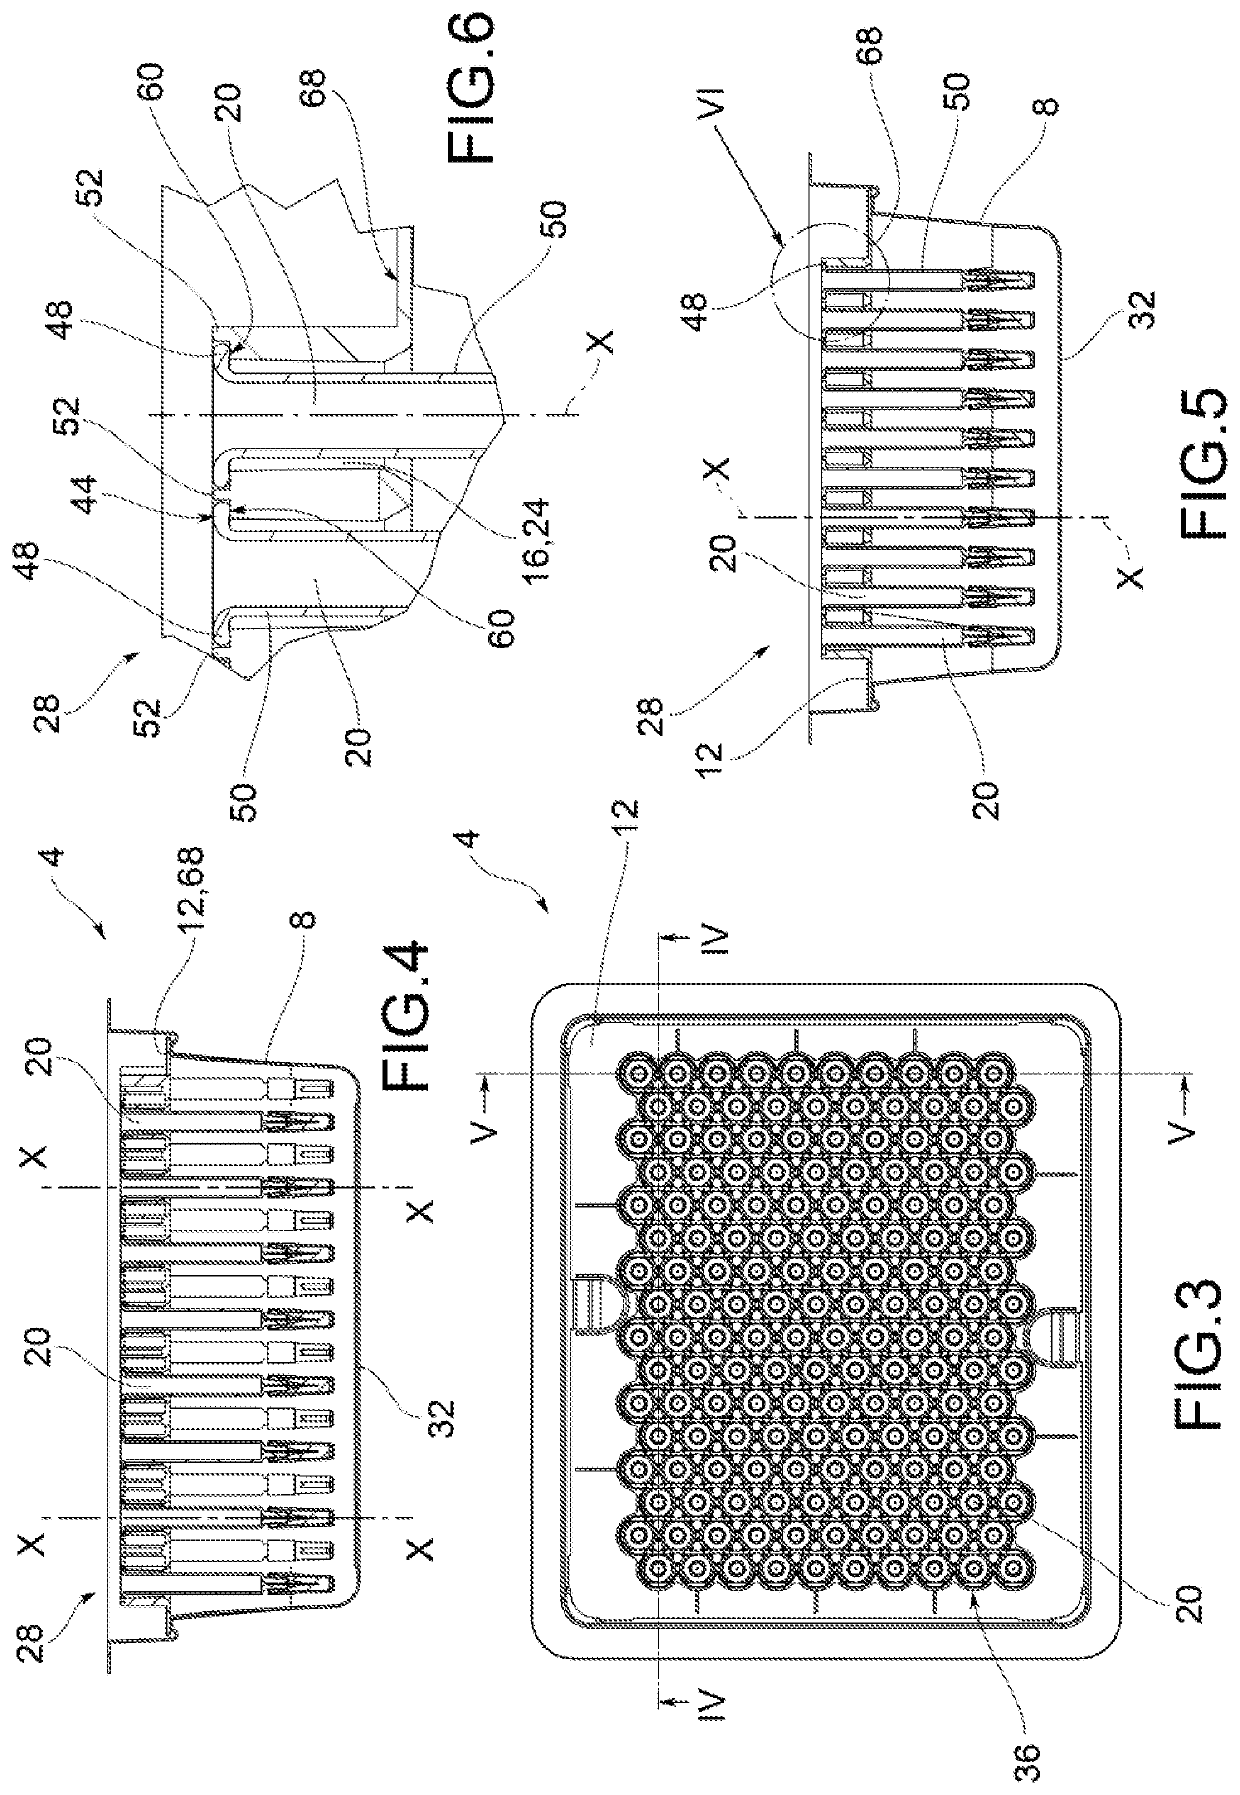 Structure for packaging containers for pharmaceutical use